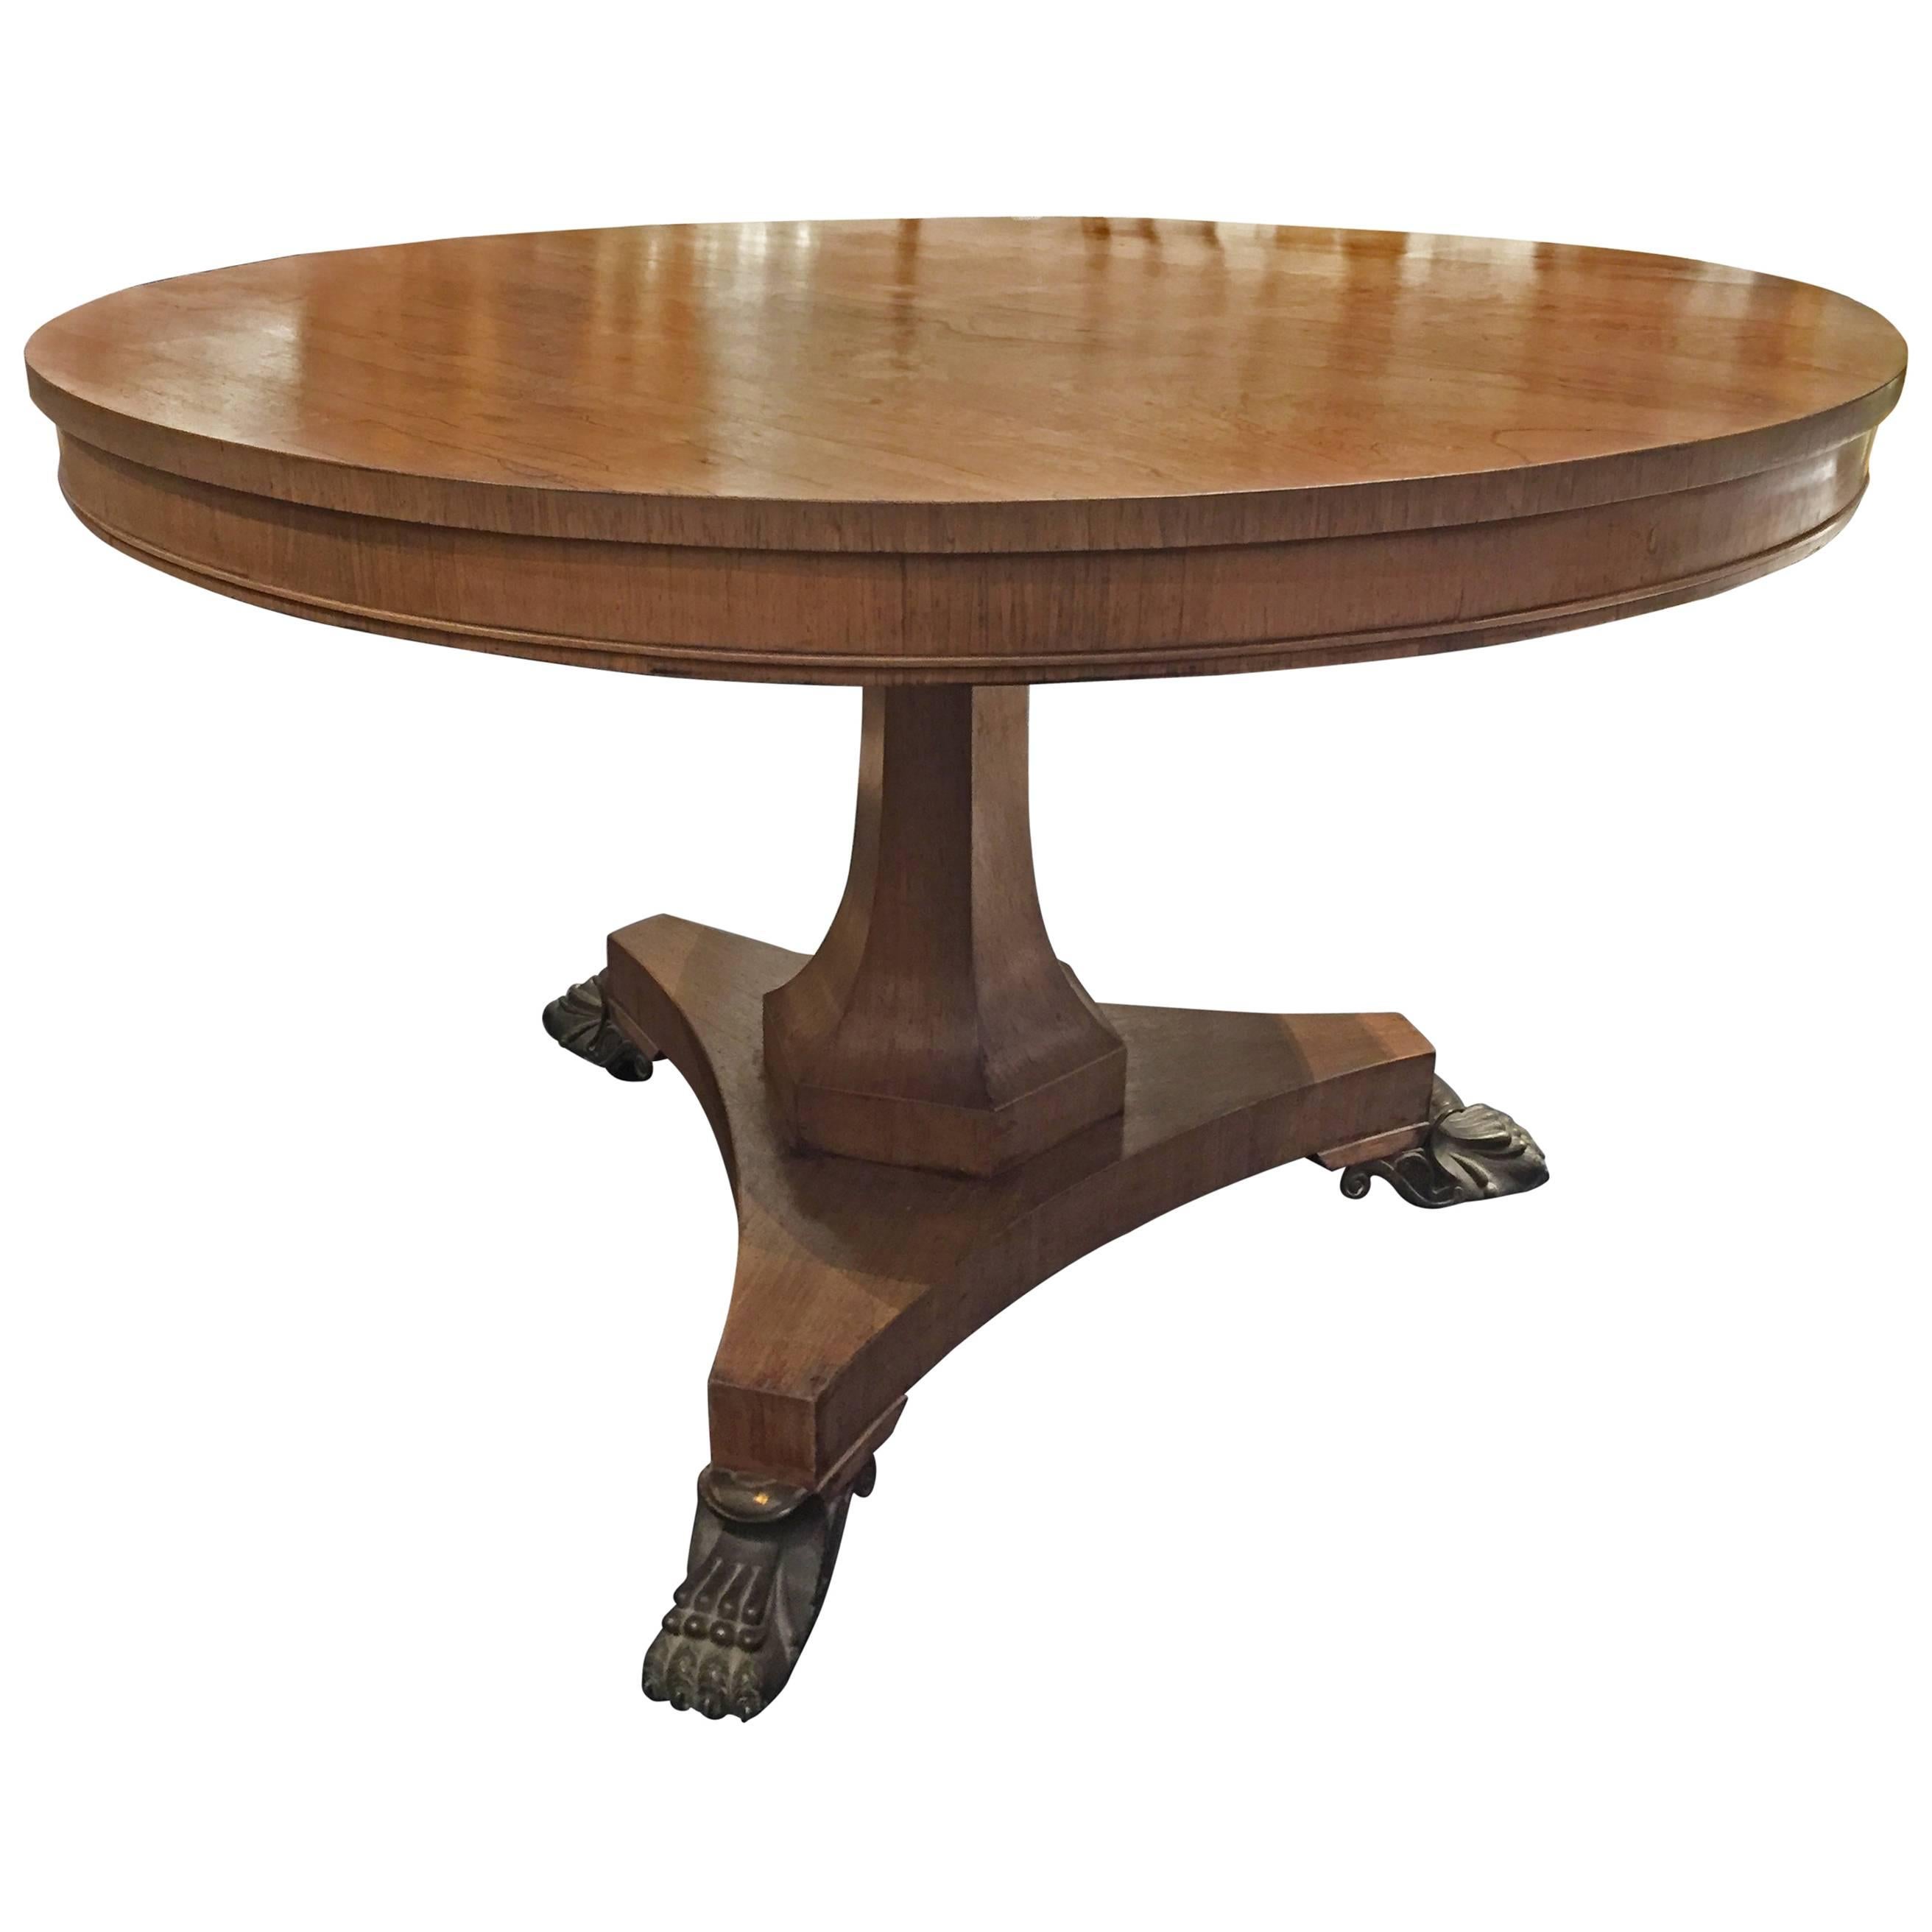 Round Swedish Antique Table in Walnut, from 1910